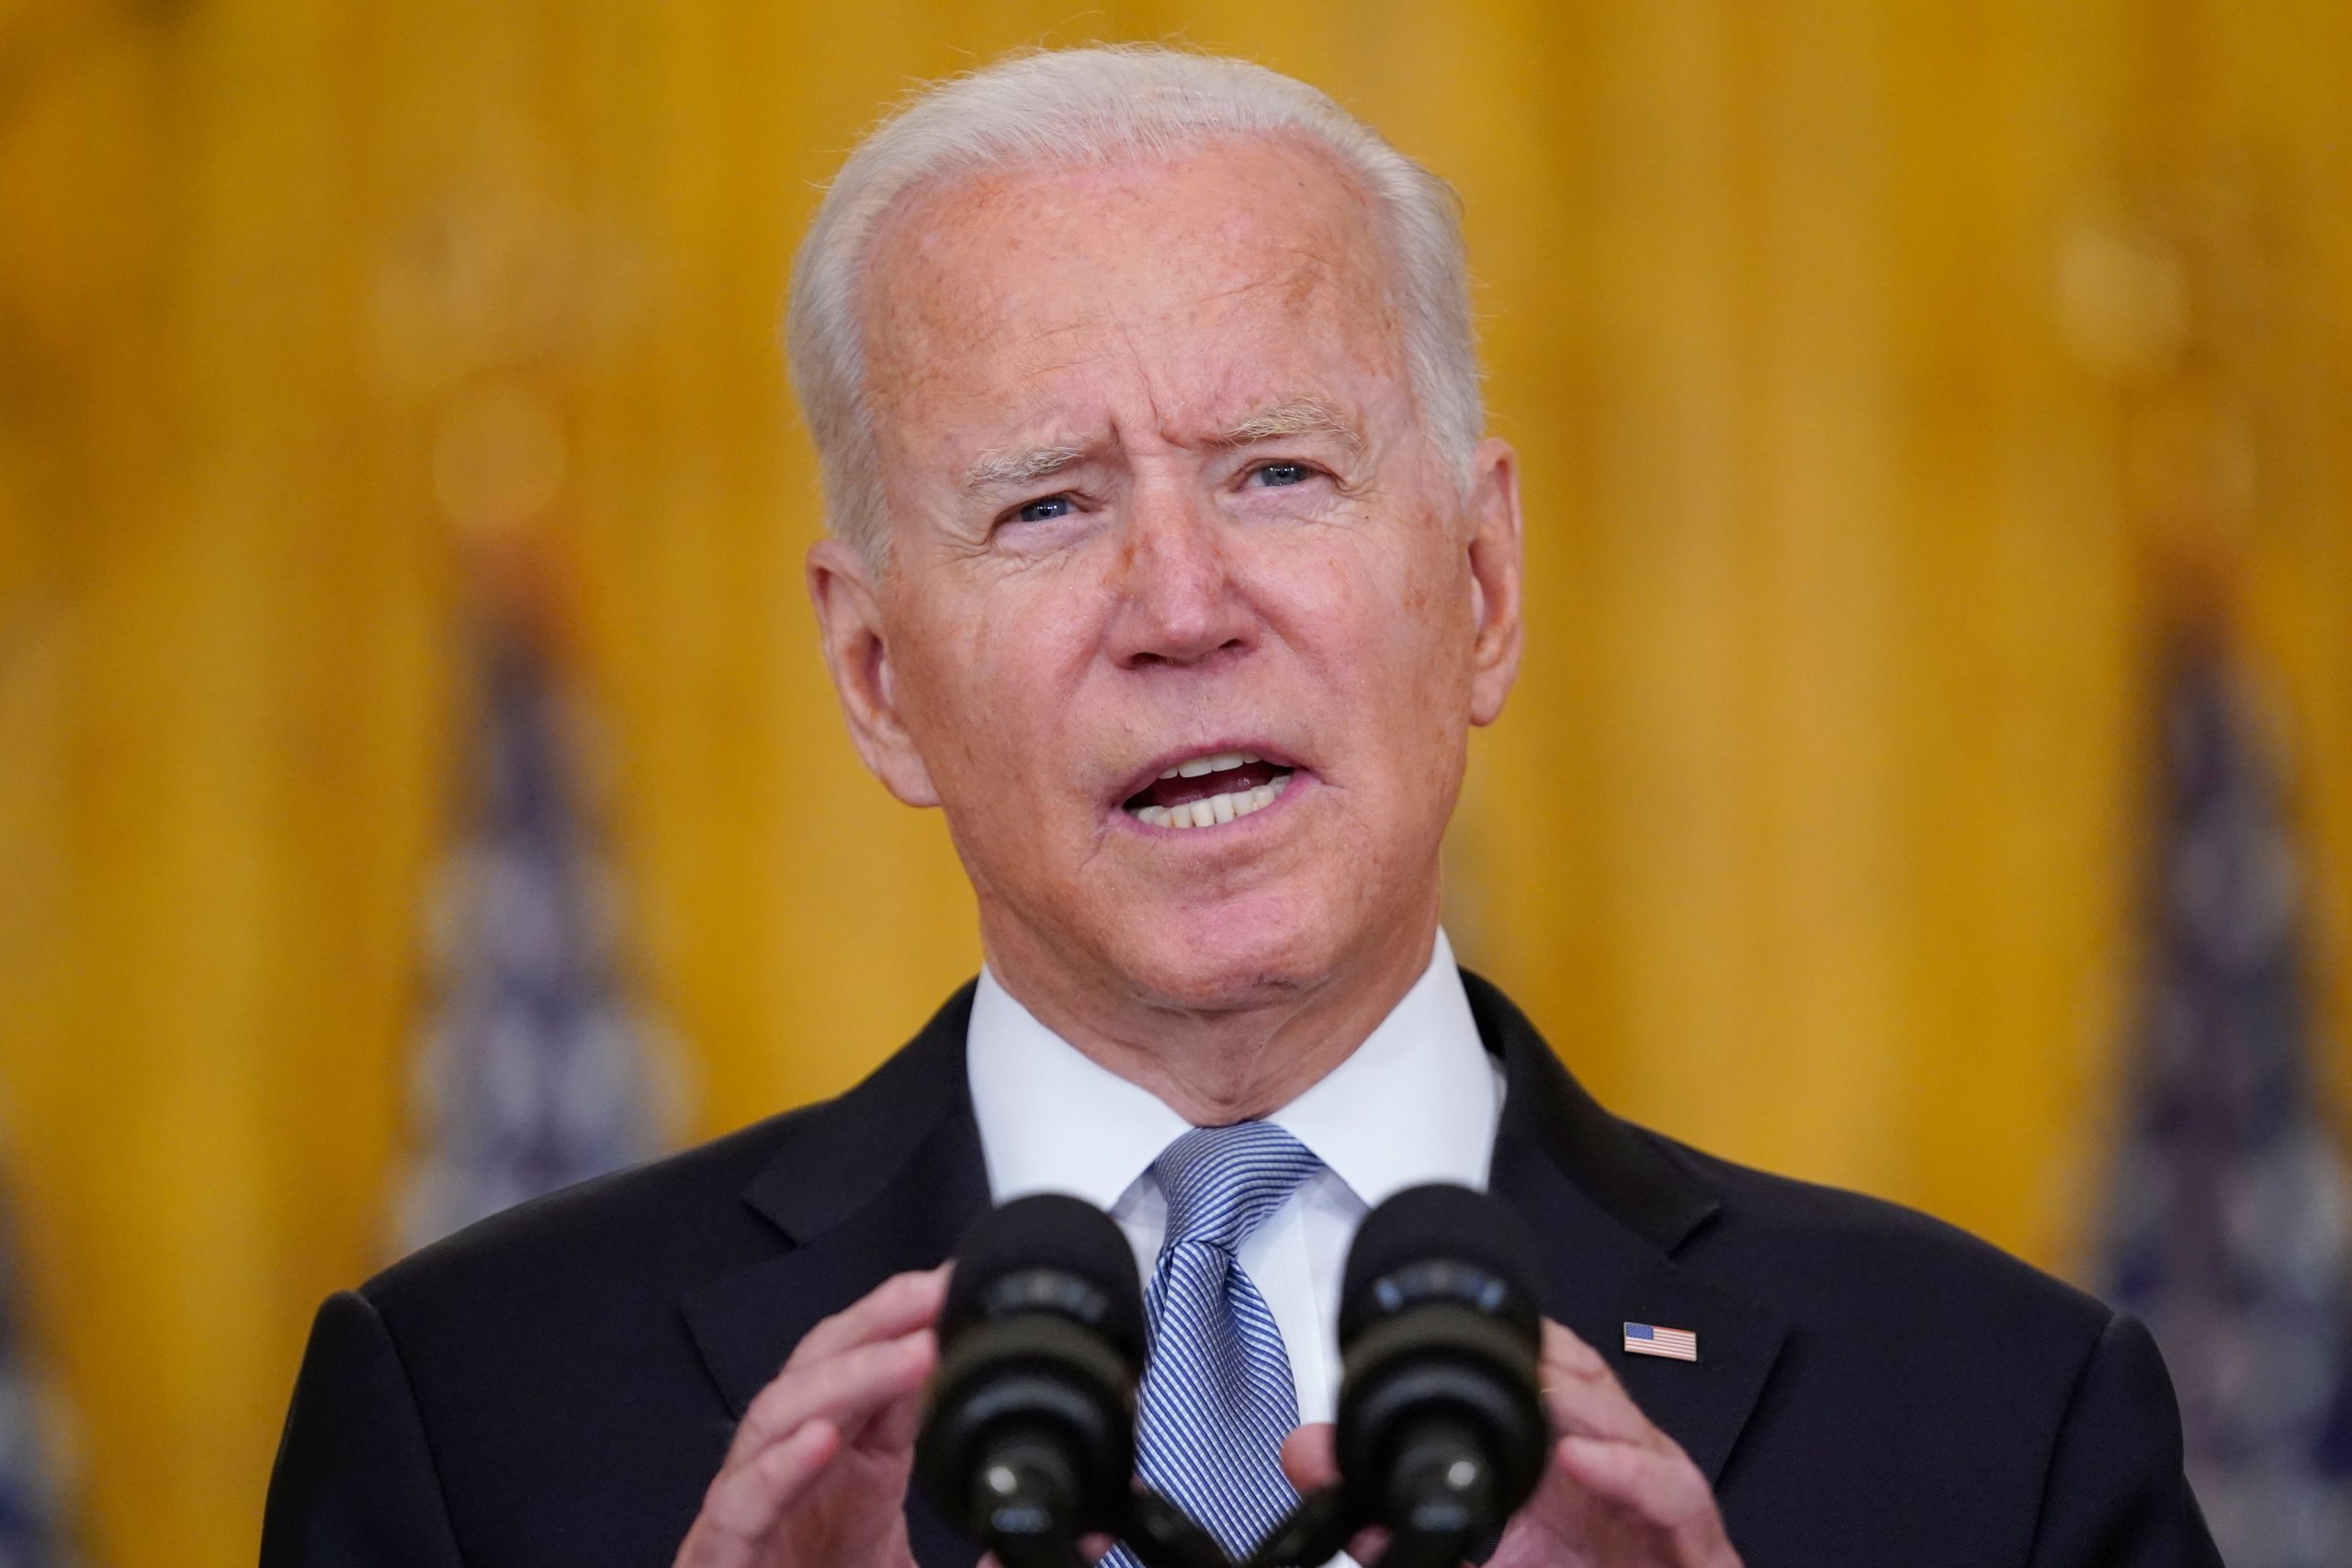 We are not done with you yet: Biden warns ISIS-K after Afghanistan exit